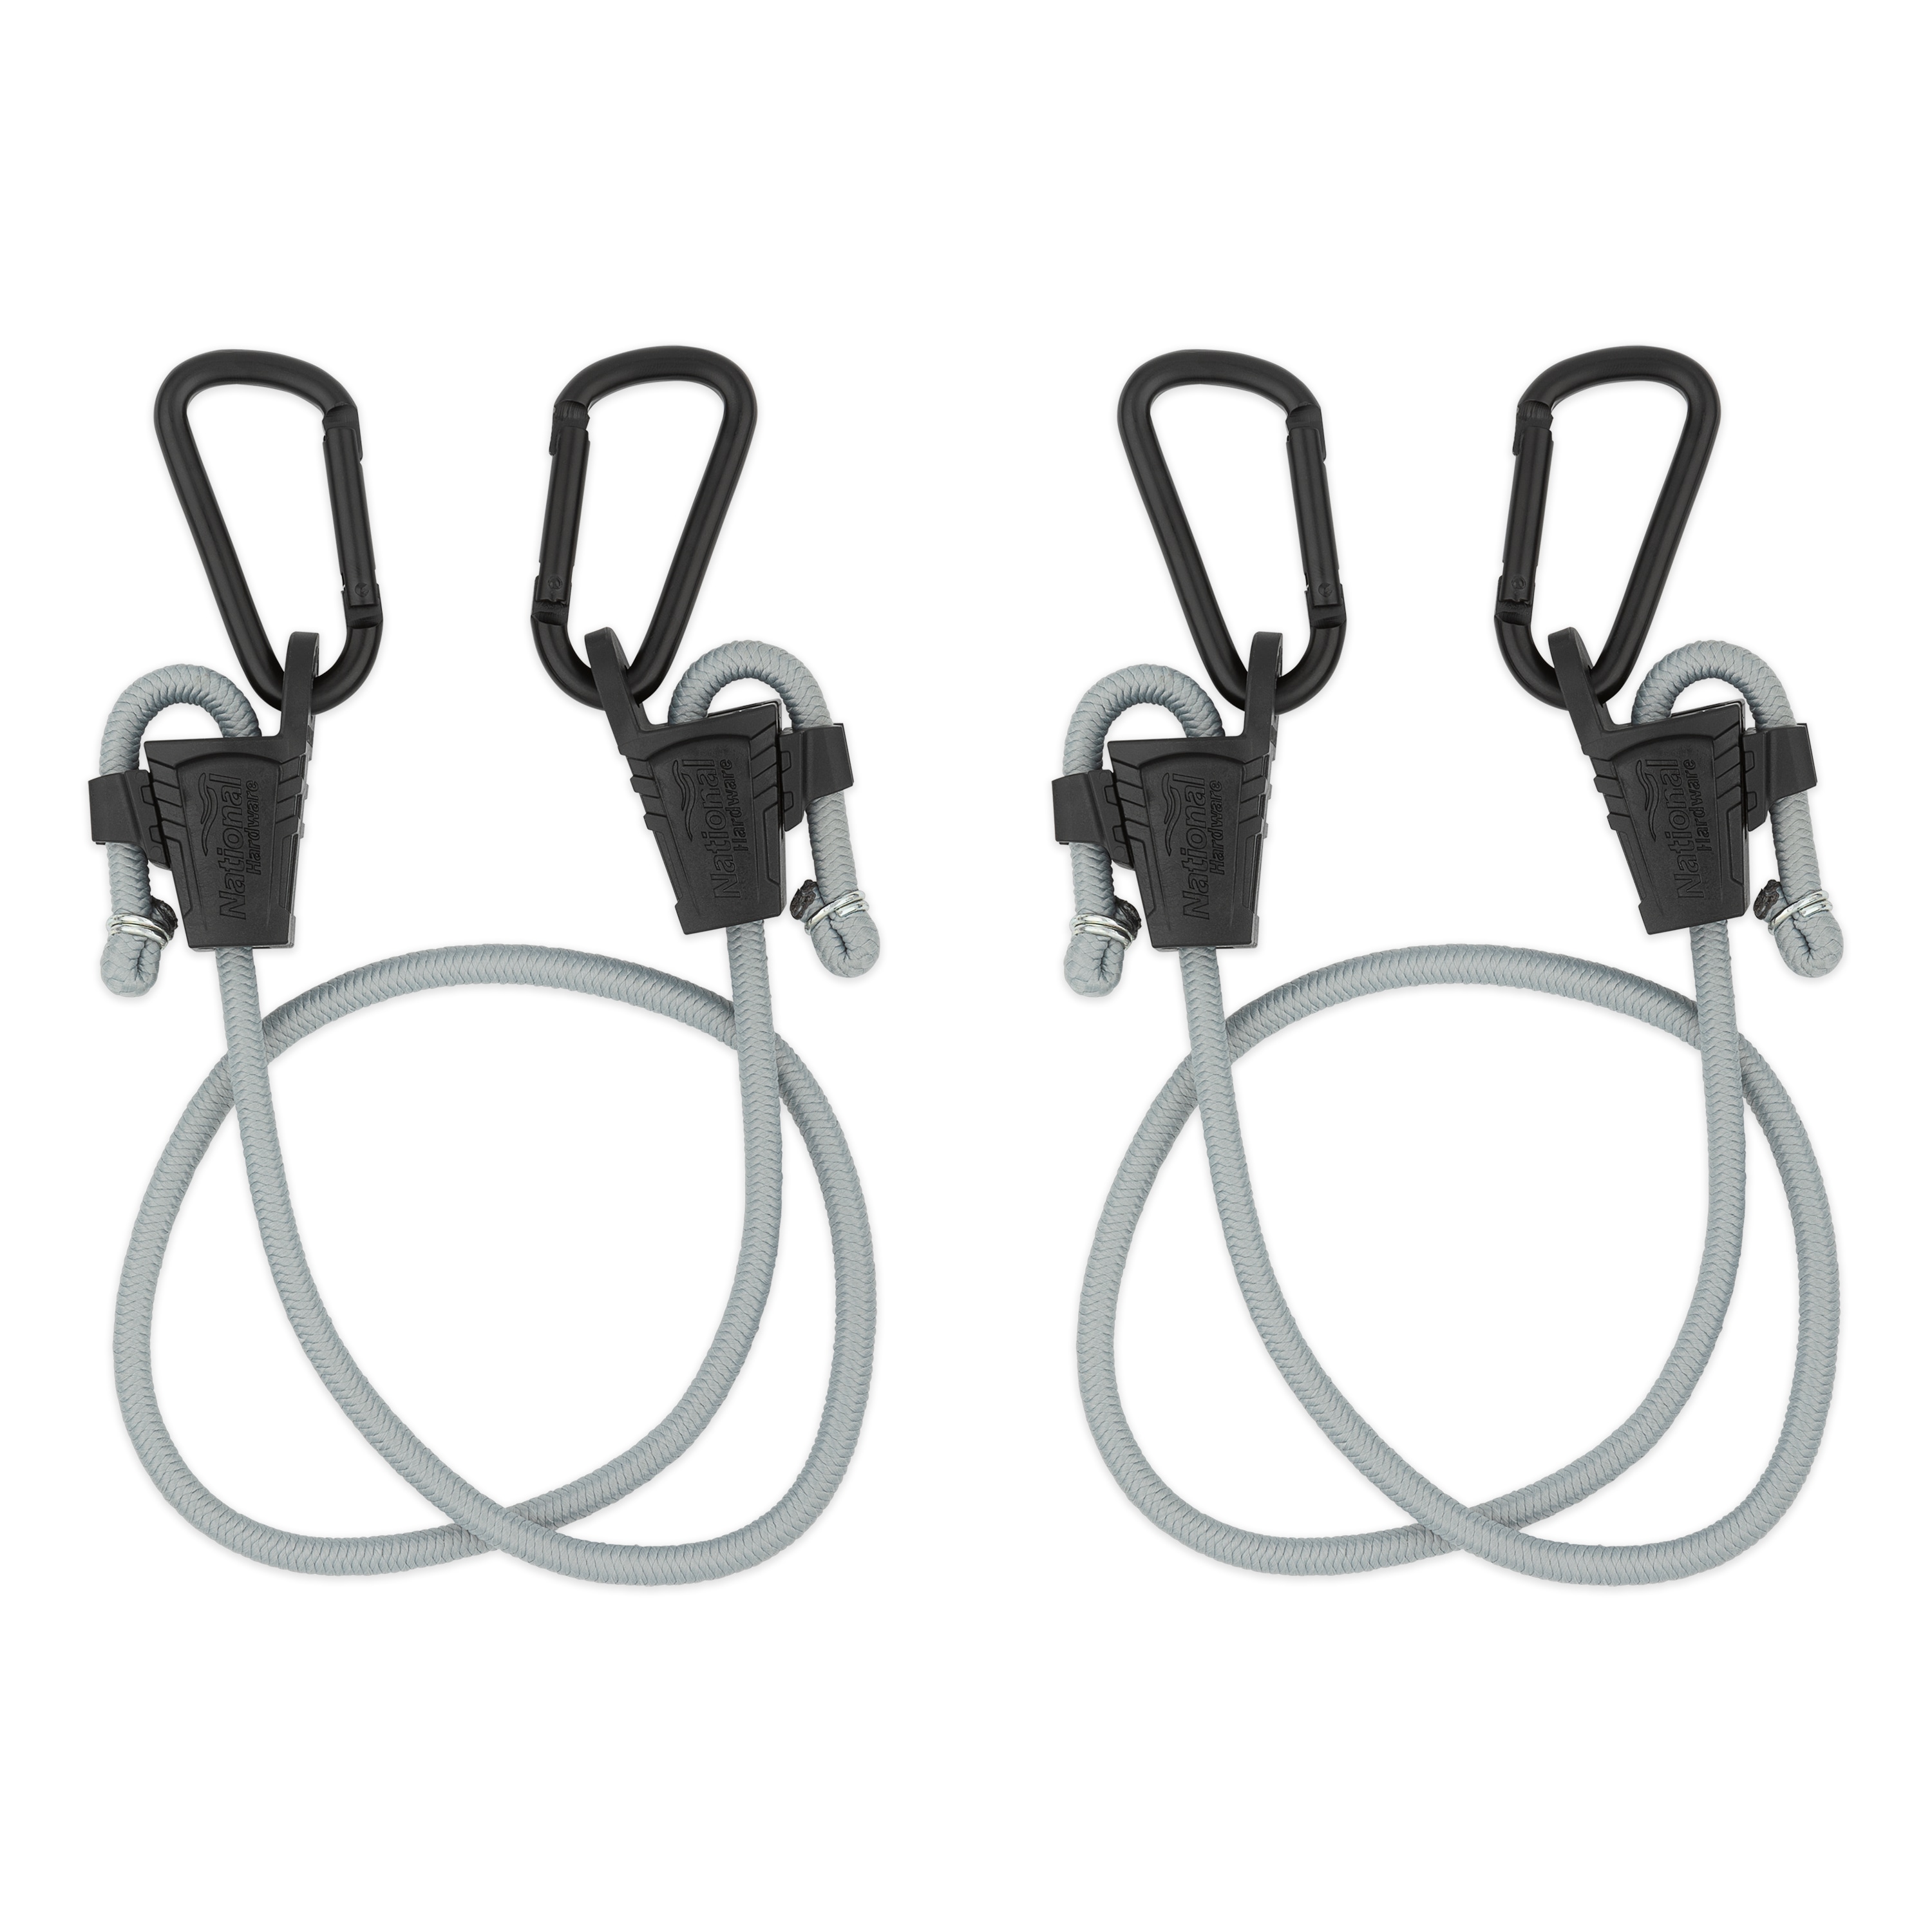 Bungee Cord with Stainless Steel Carabiner Short Black 16 Elastic